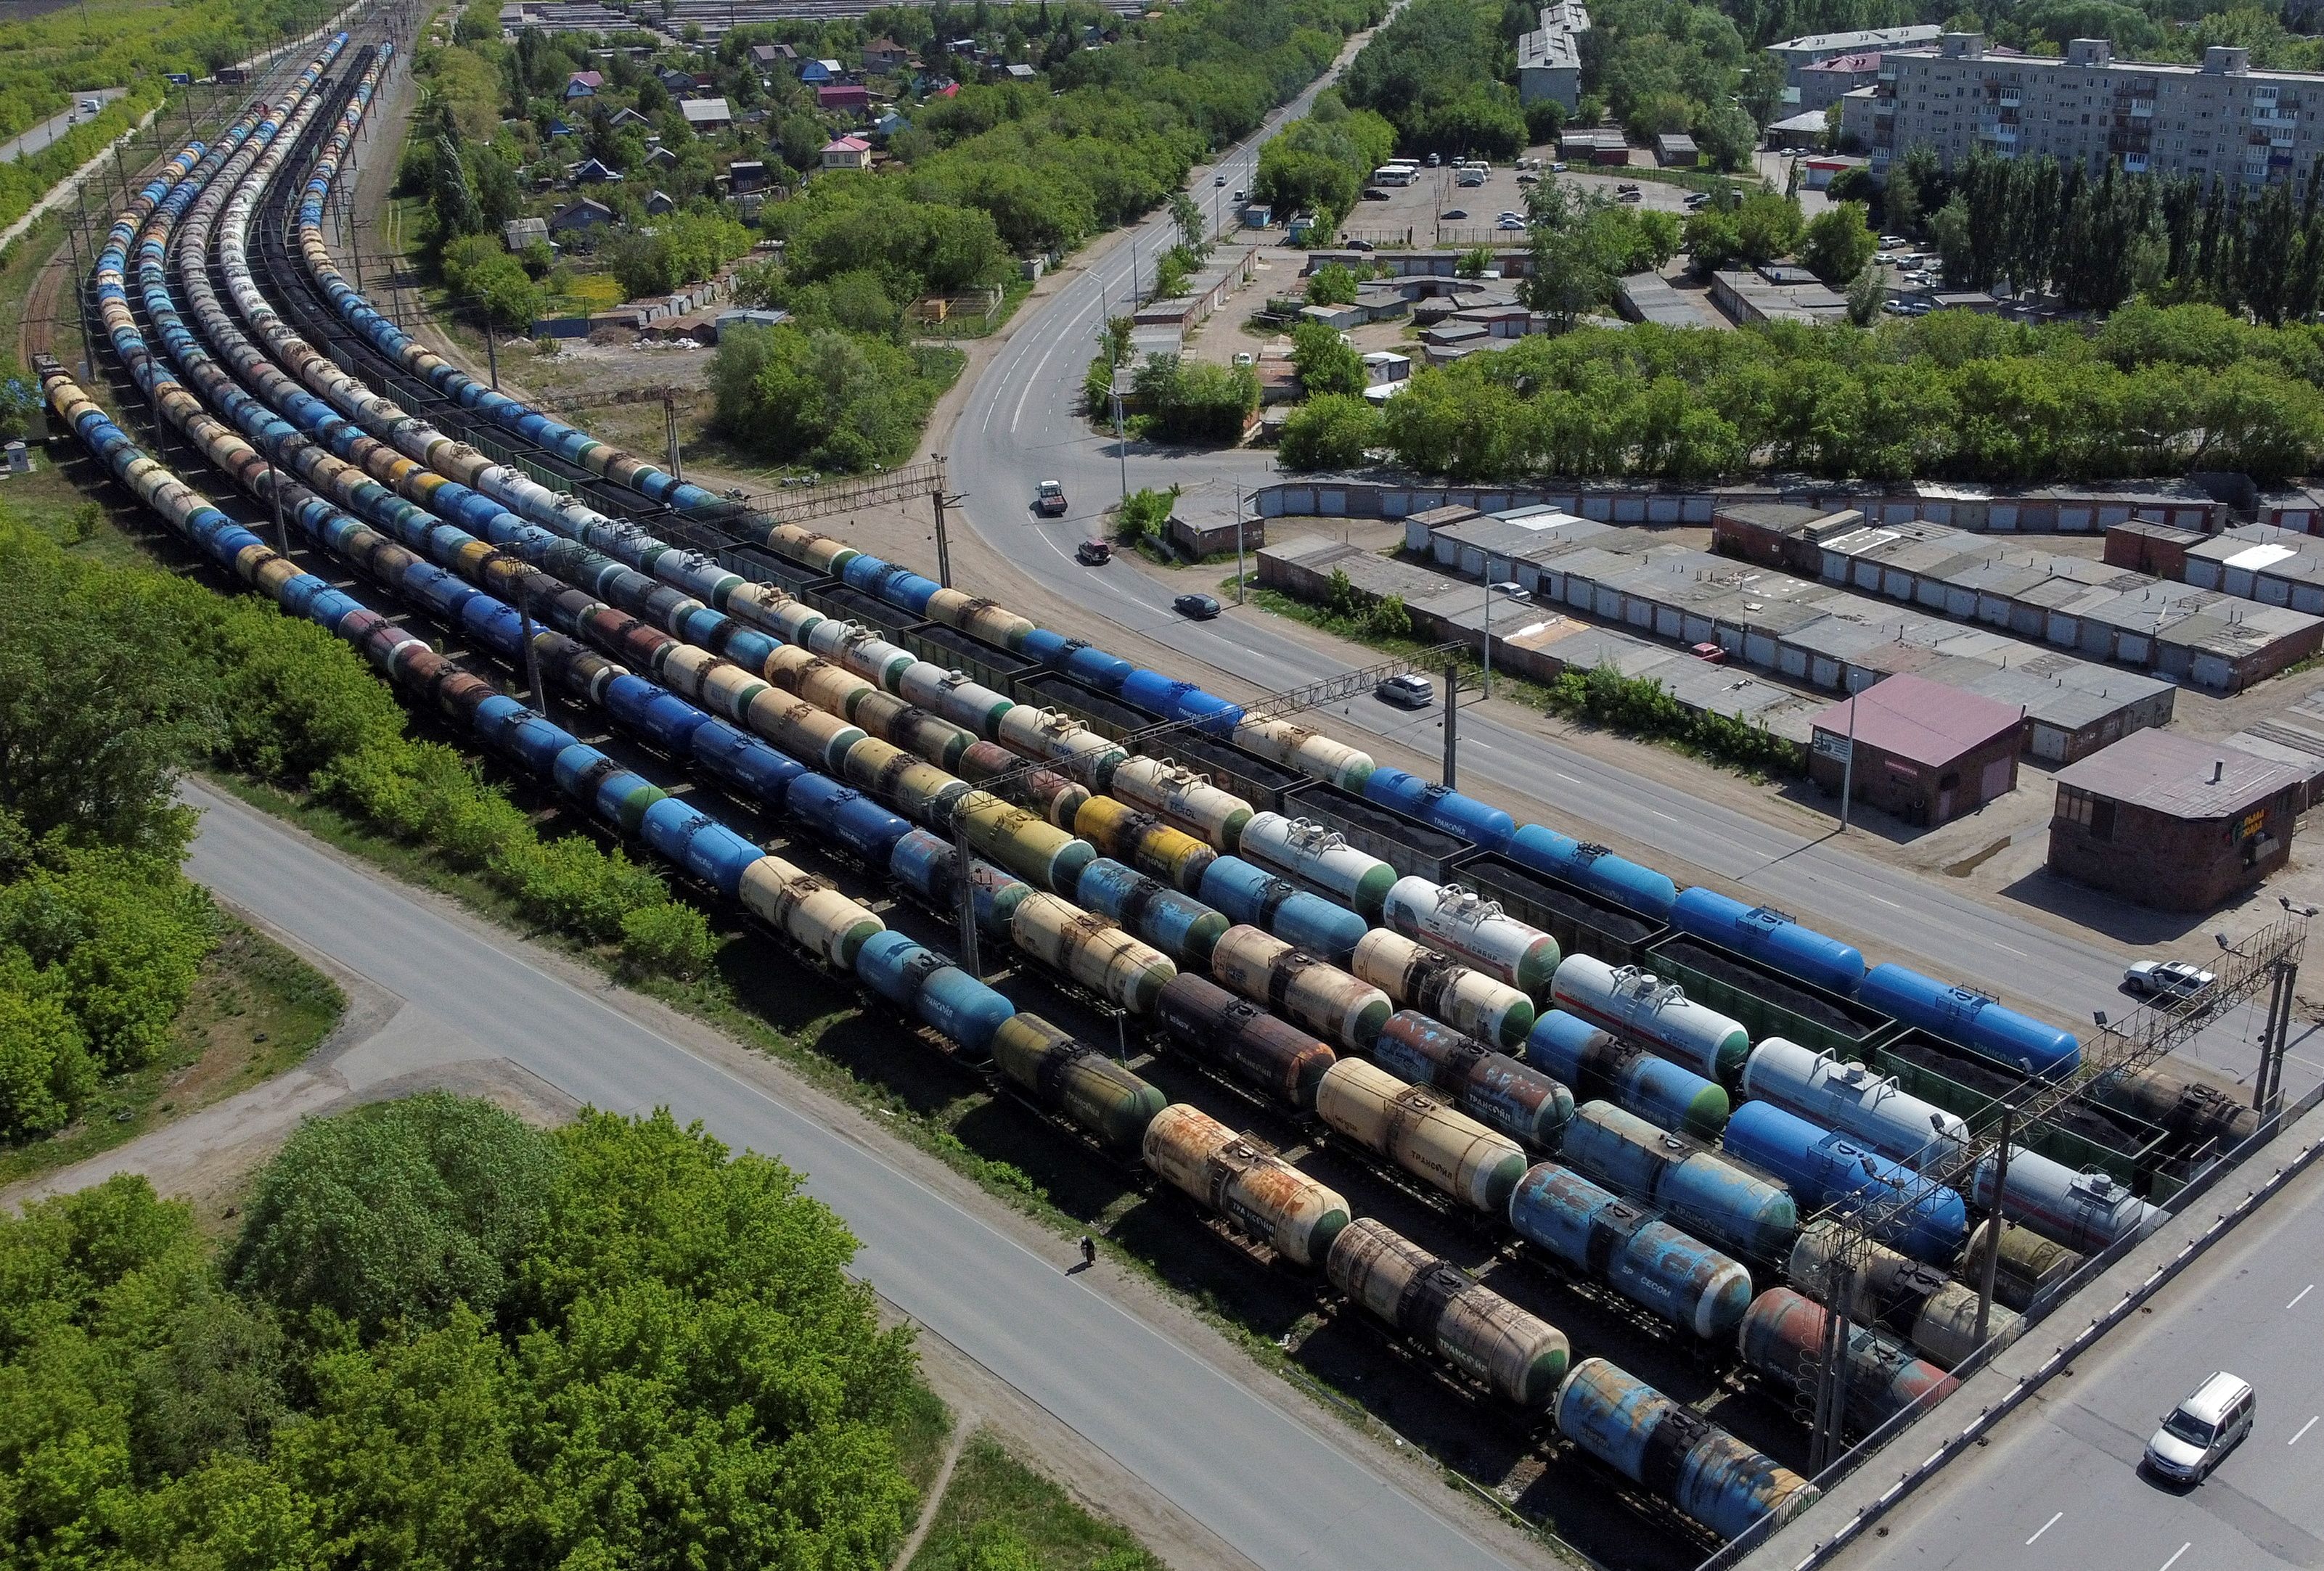 An aerial view shows oil tank cars and railroad freight wagons in Omsk